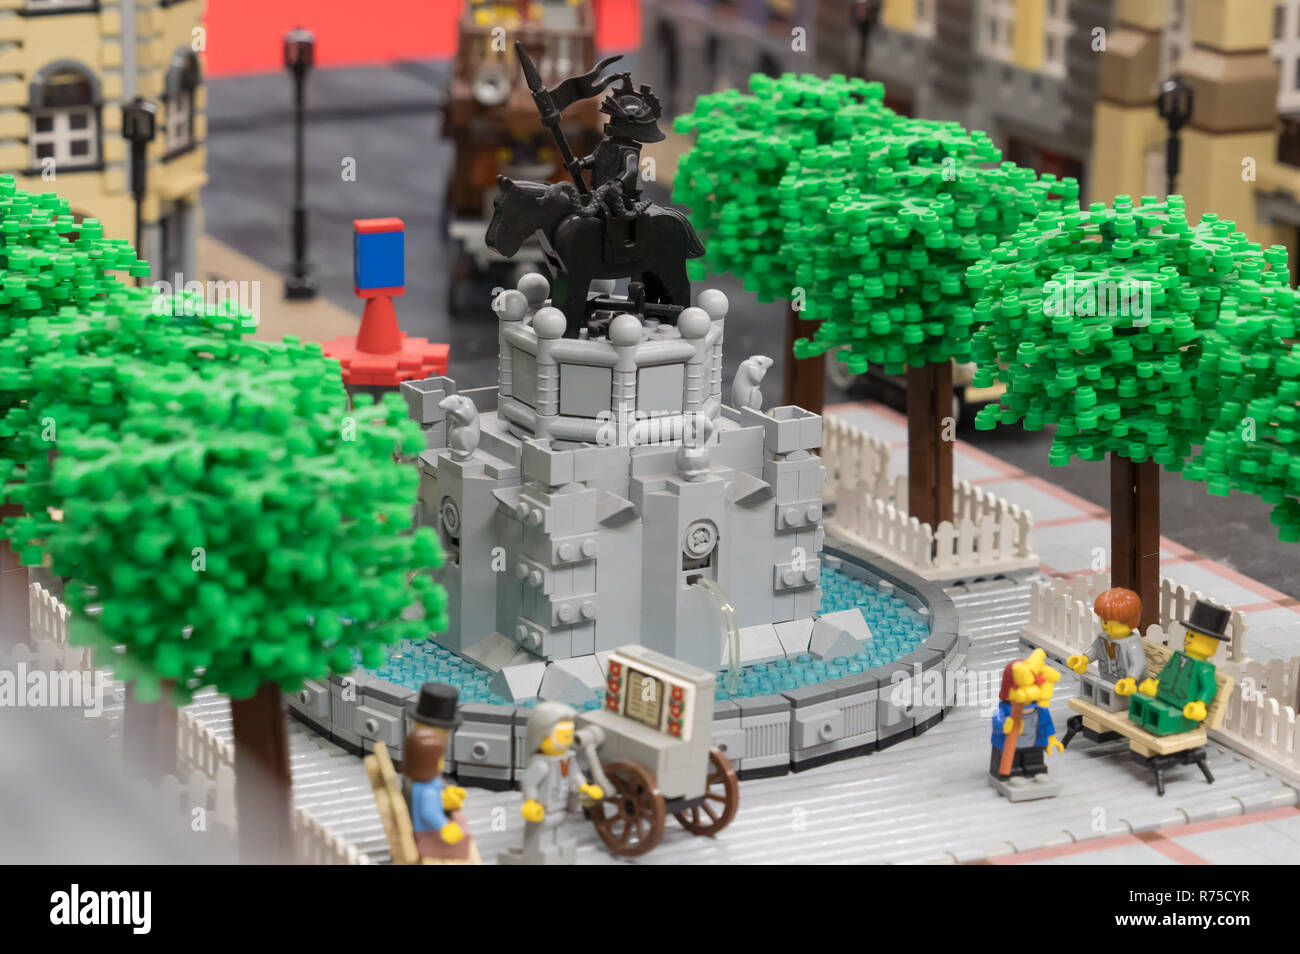 Budapest, Hungary. 7th Dec, 2018. Lego constructions are seen on display at  the KockaPark in Budapest, Hungary, on Dec. 7, 2018. KockaPark (Brick Park  in Hungarian) presents an exhibition of hand constructed